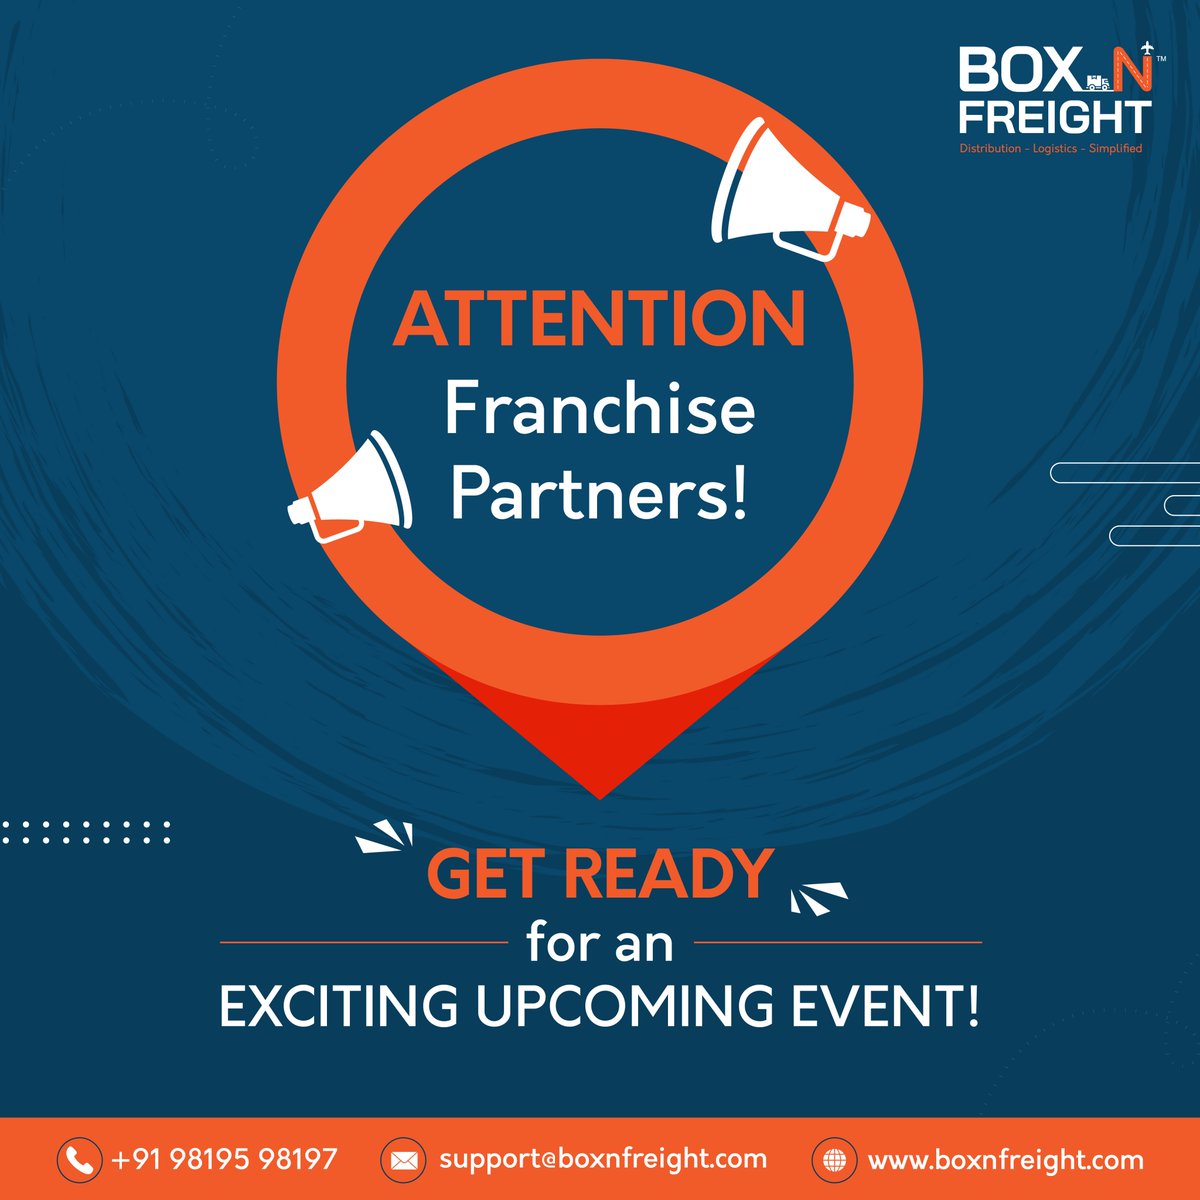 The BOX N FREIGHT event is a chance for franchisee partners to connect, share best practices, and learn from one another while enjoying a fun and exciting atmosphere.

#boxnfreight #franchisepartners #EVENT